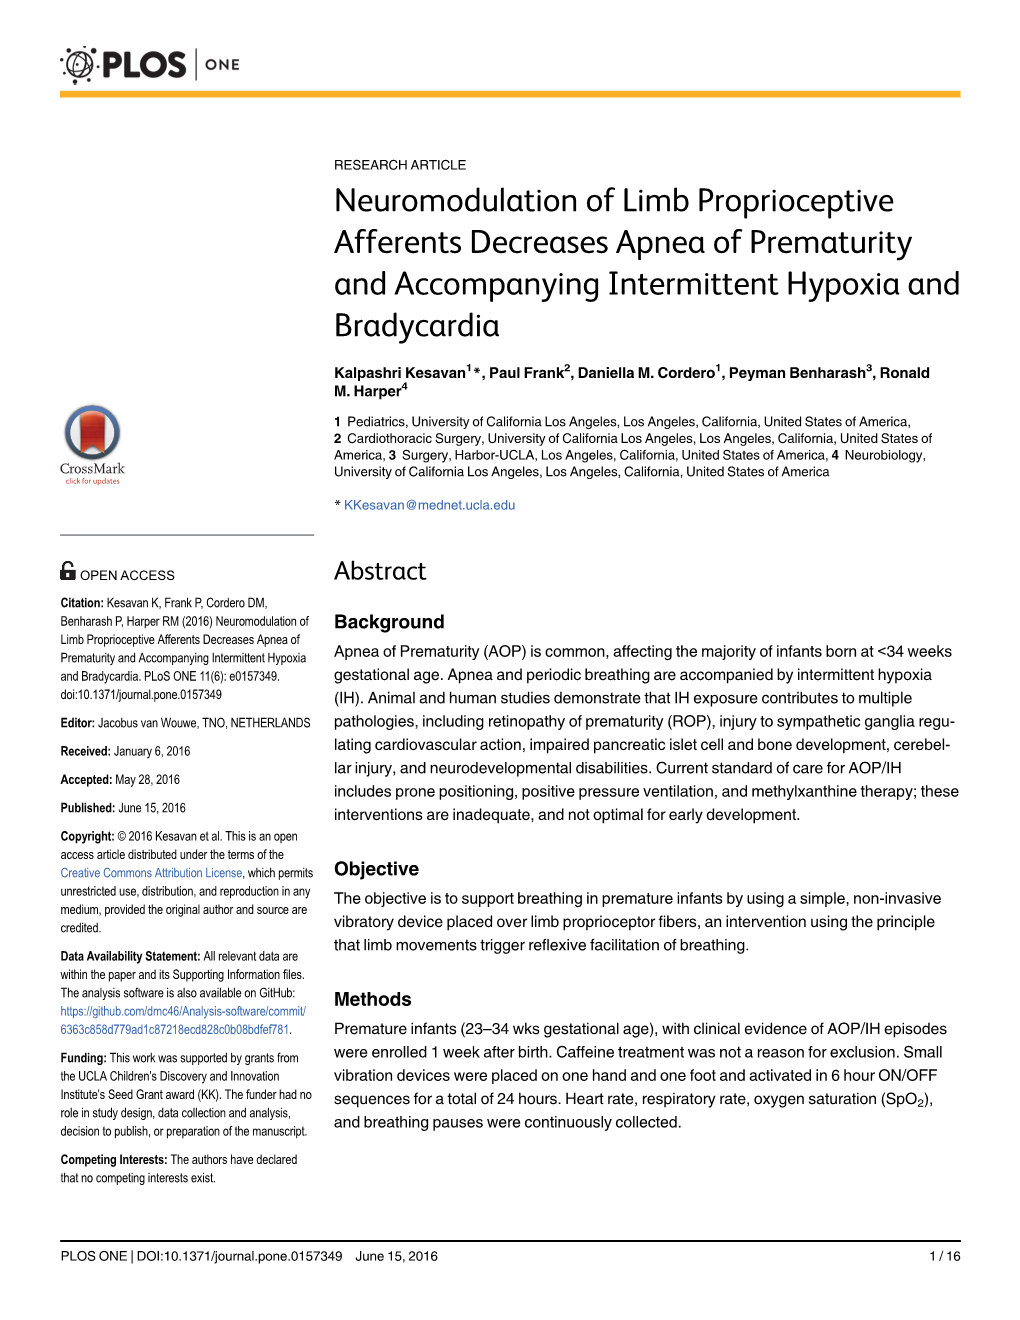 Neuromodulation of Limb Proprioceptive Afferents Decreases Apnea of Prematurity and Accompanying Intermittent Hypoxia and Bradycardia